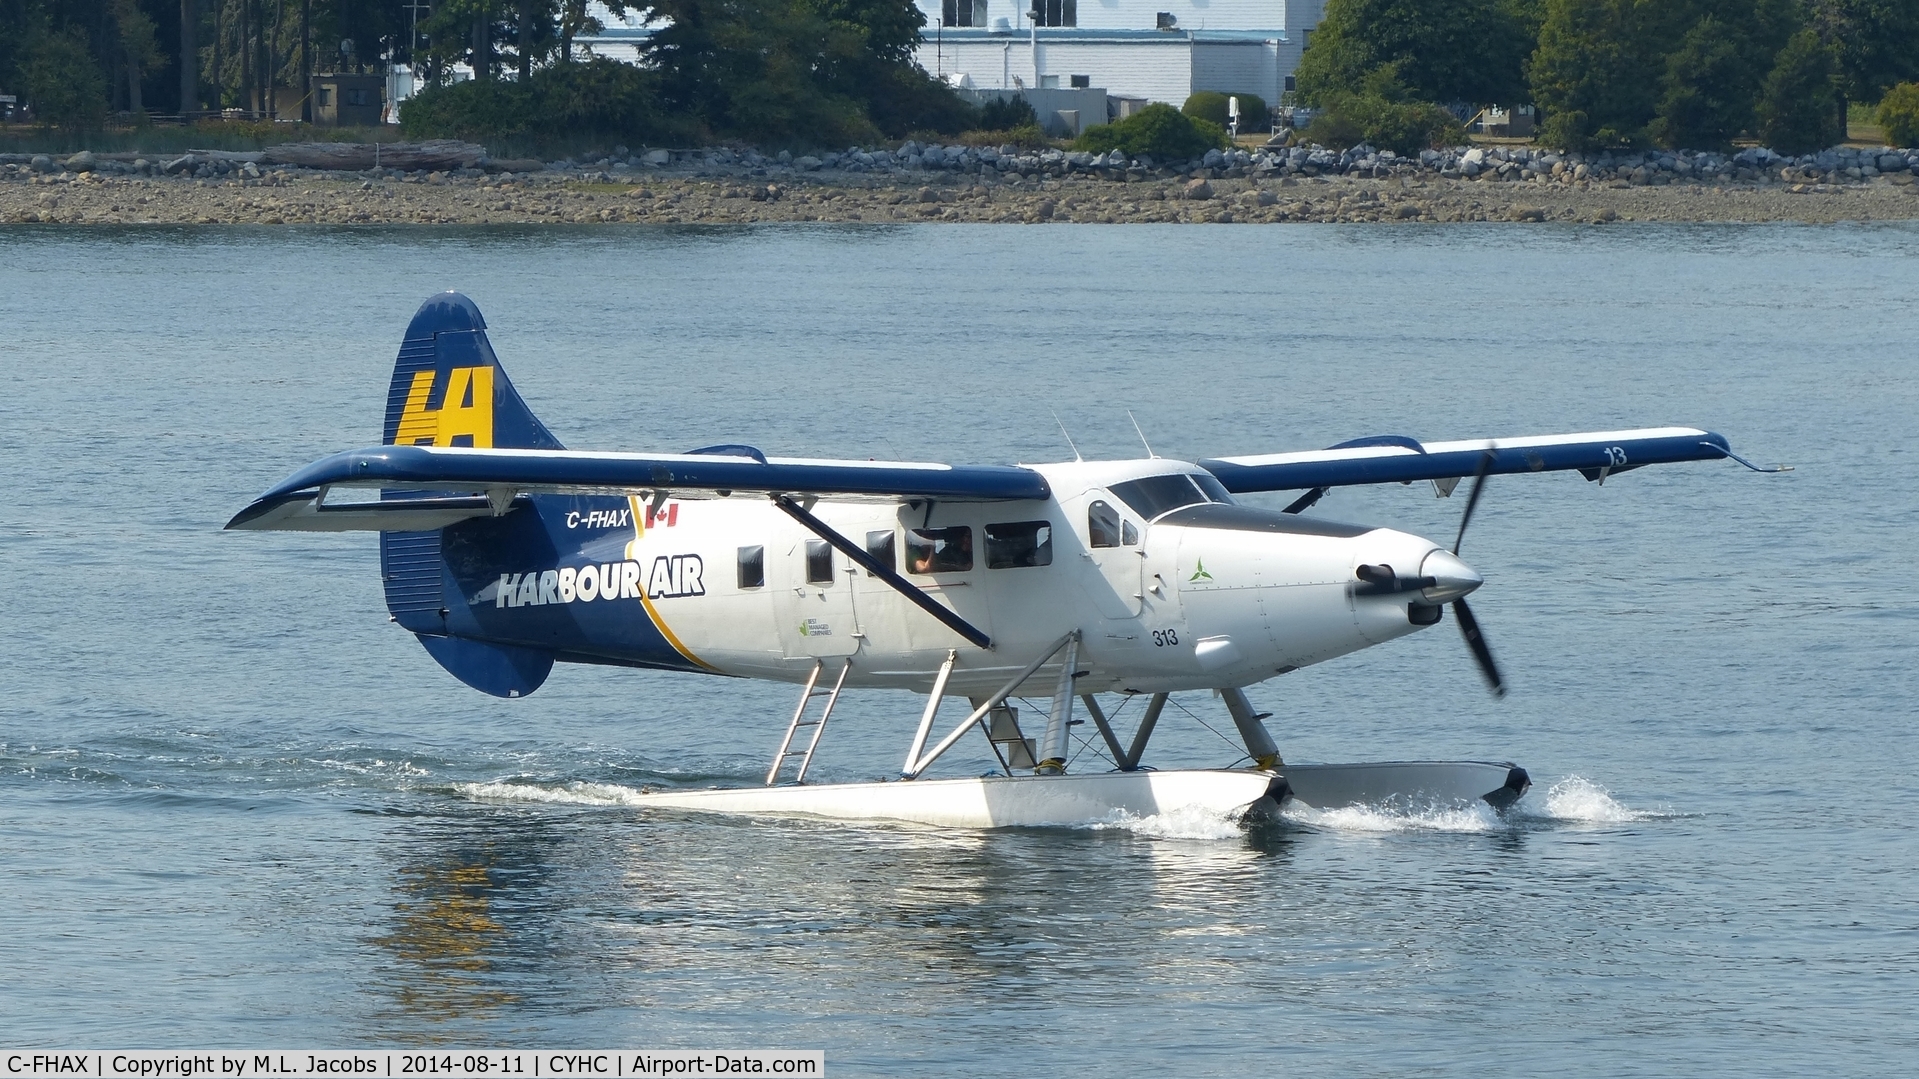 C-FHAX, 1959 De Havilland Canada DHC-3T Vazar Turbine Otter Otter C/N 339, Harbour Air #313 taxiing for takeoff in Coal Harbour.